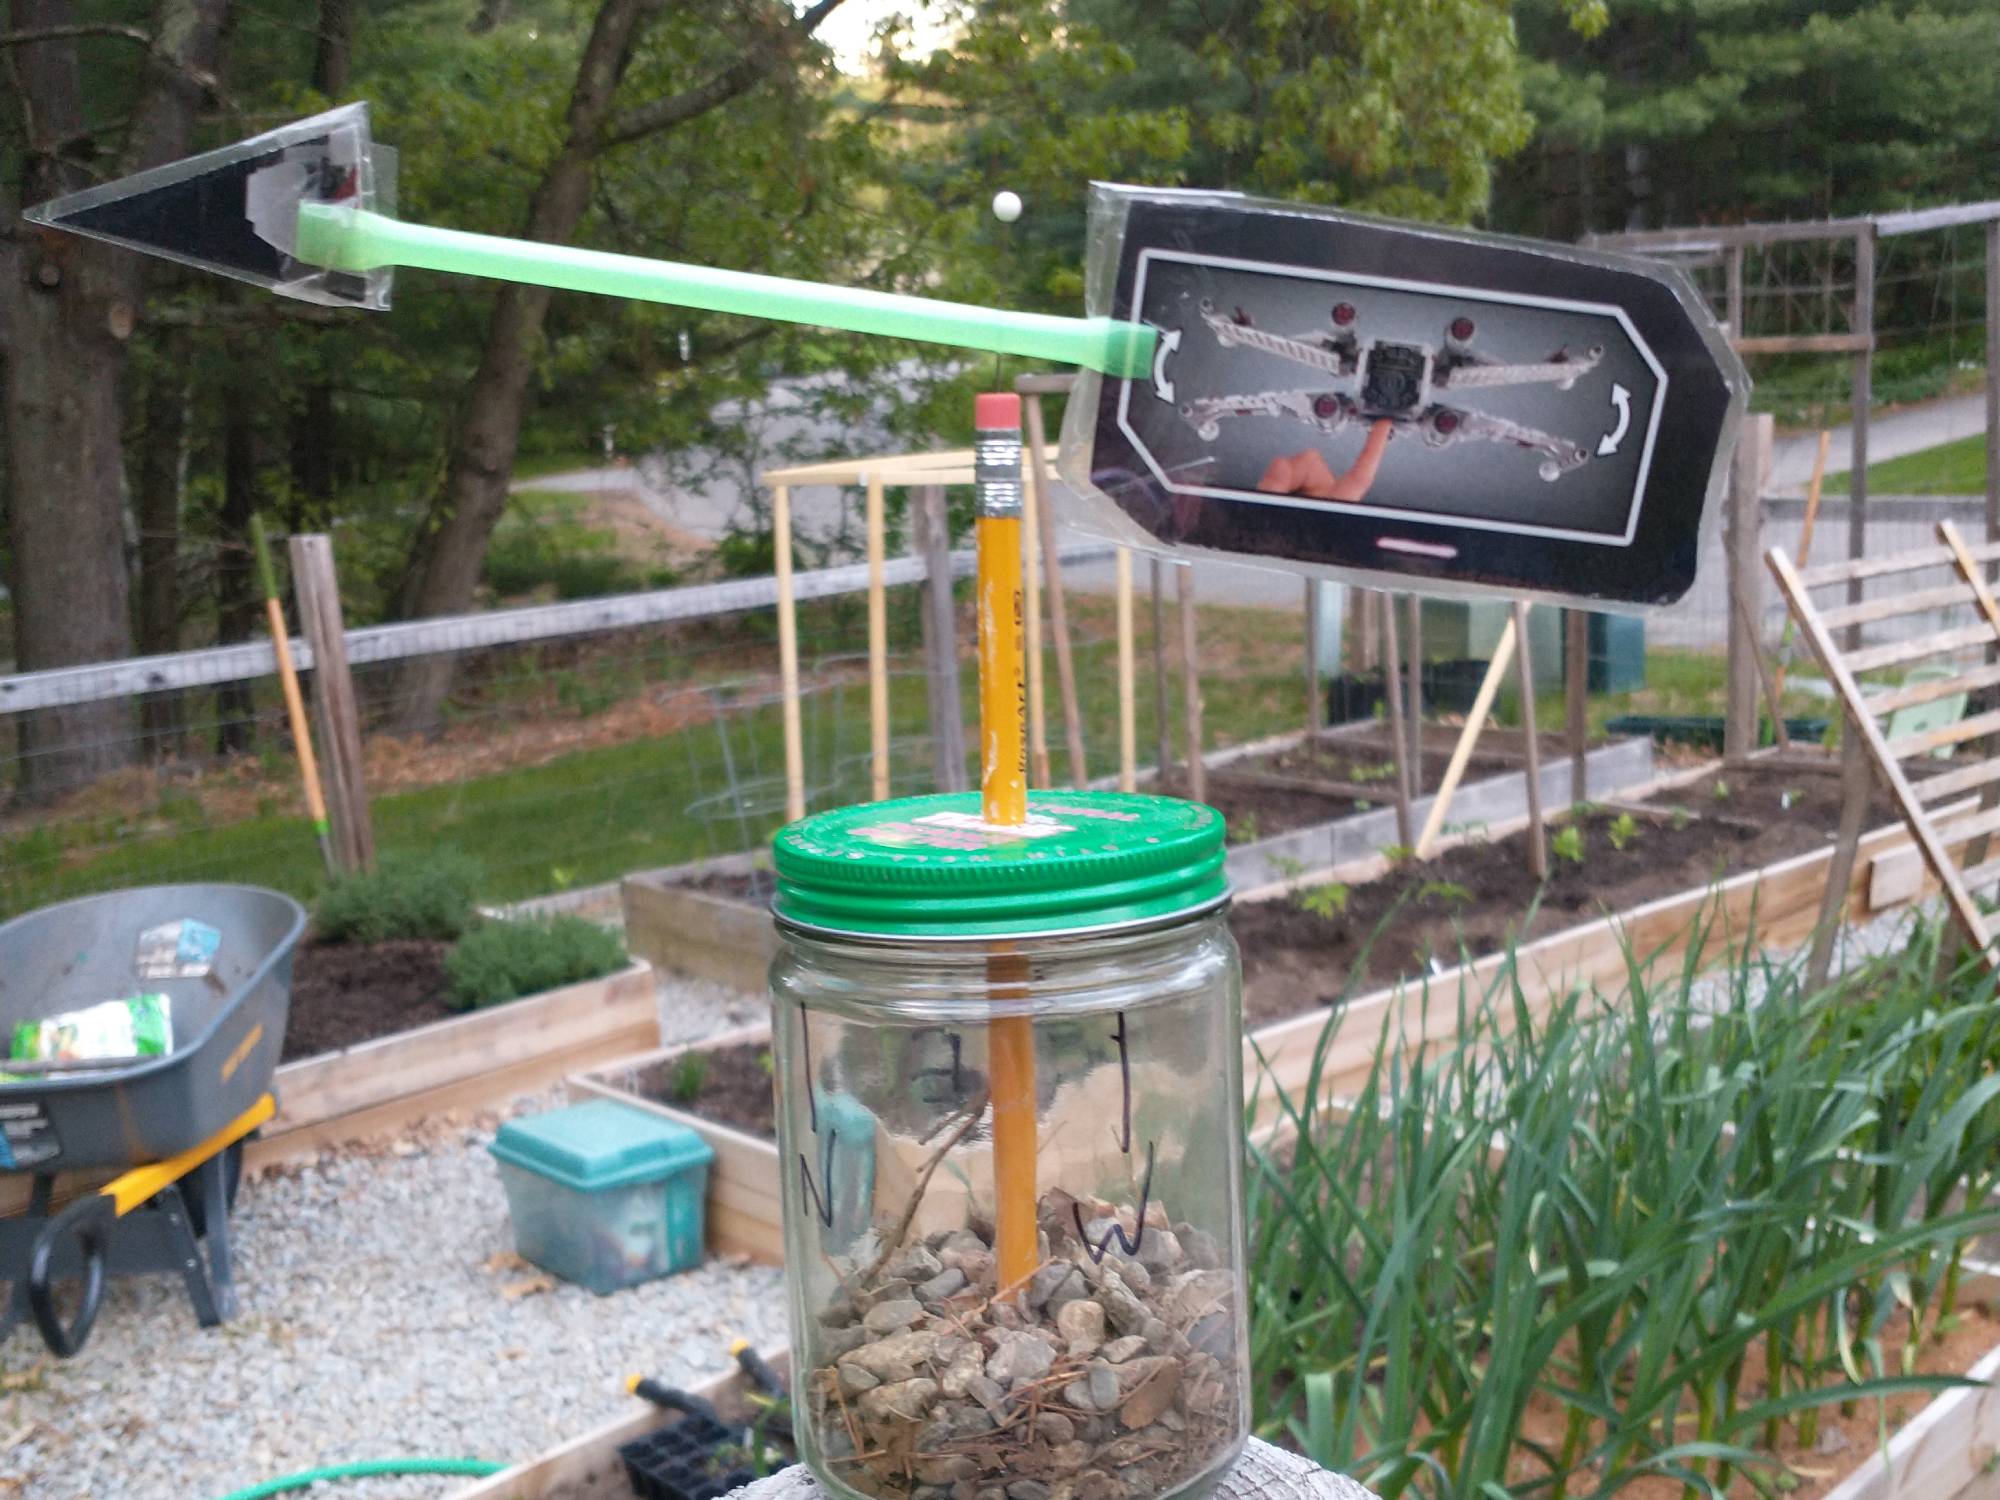 Make your own weather station with recycled materials